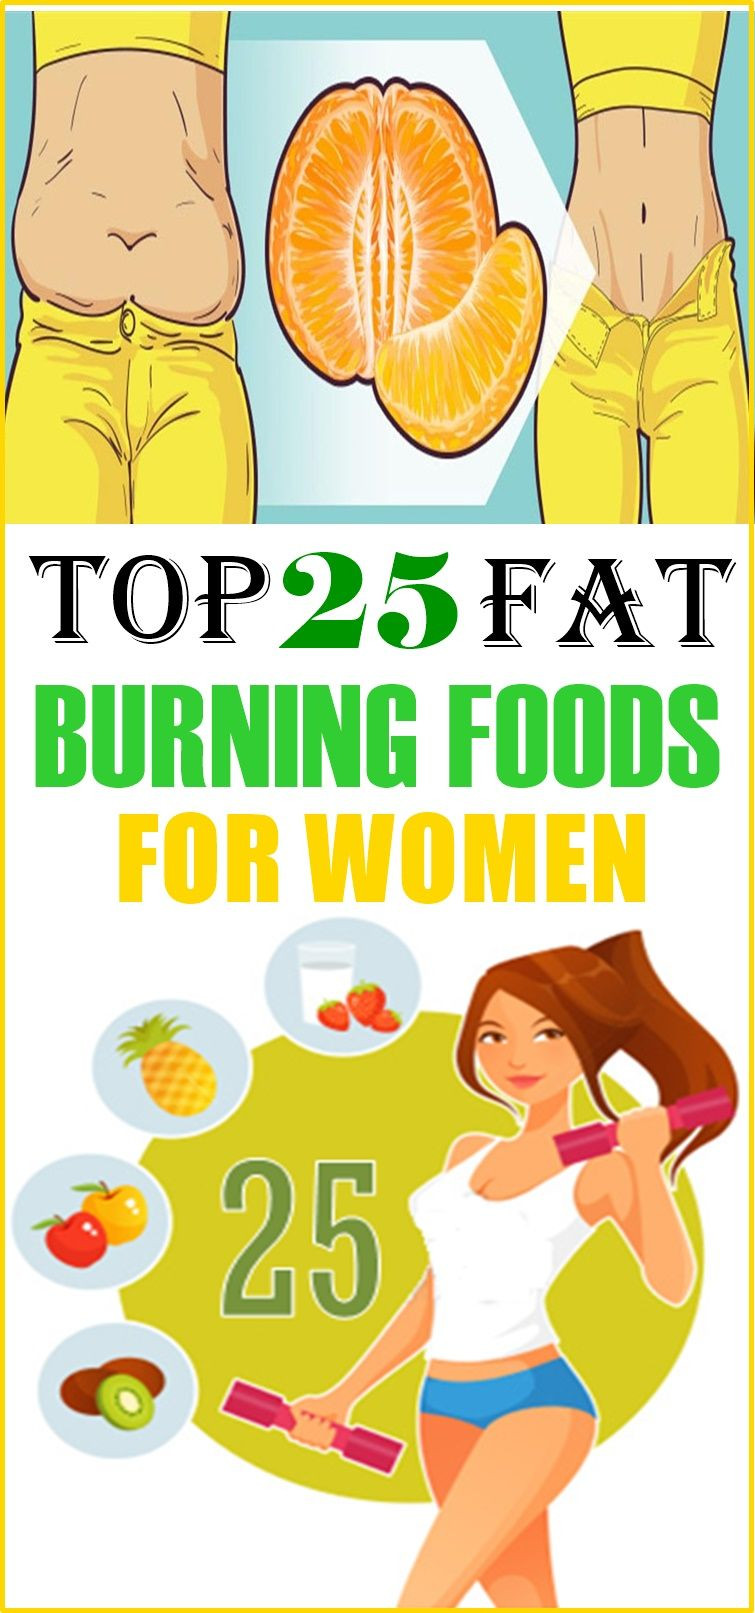 Fat Burning Foods For Women
 THE TOP 25 FAT BURNING FOODS FOR WOMEN